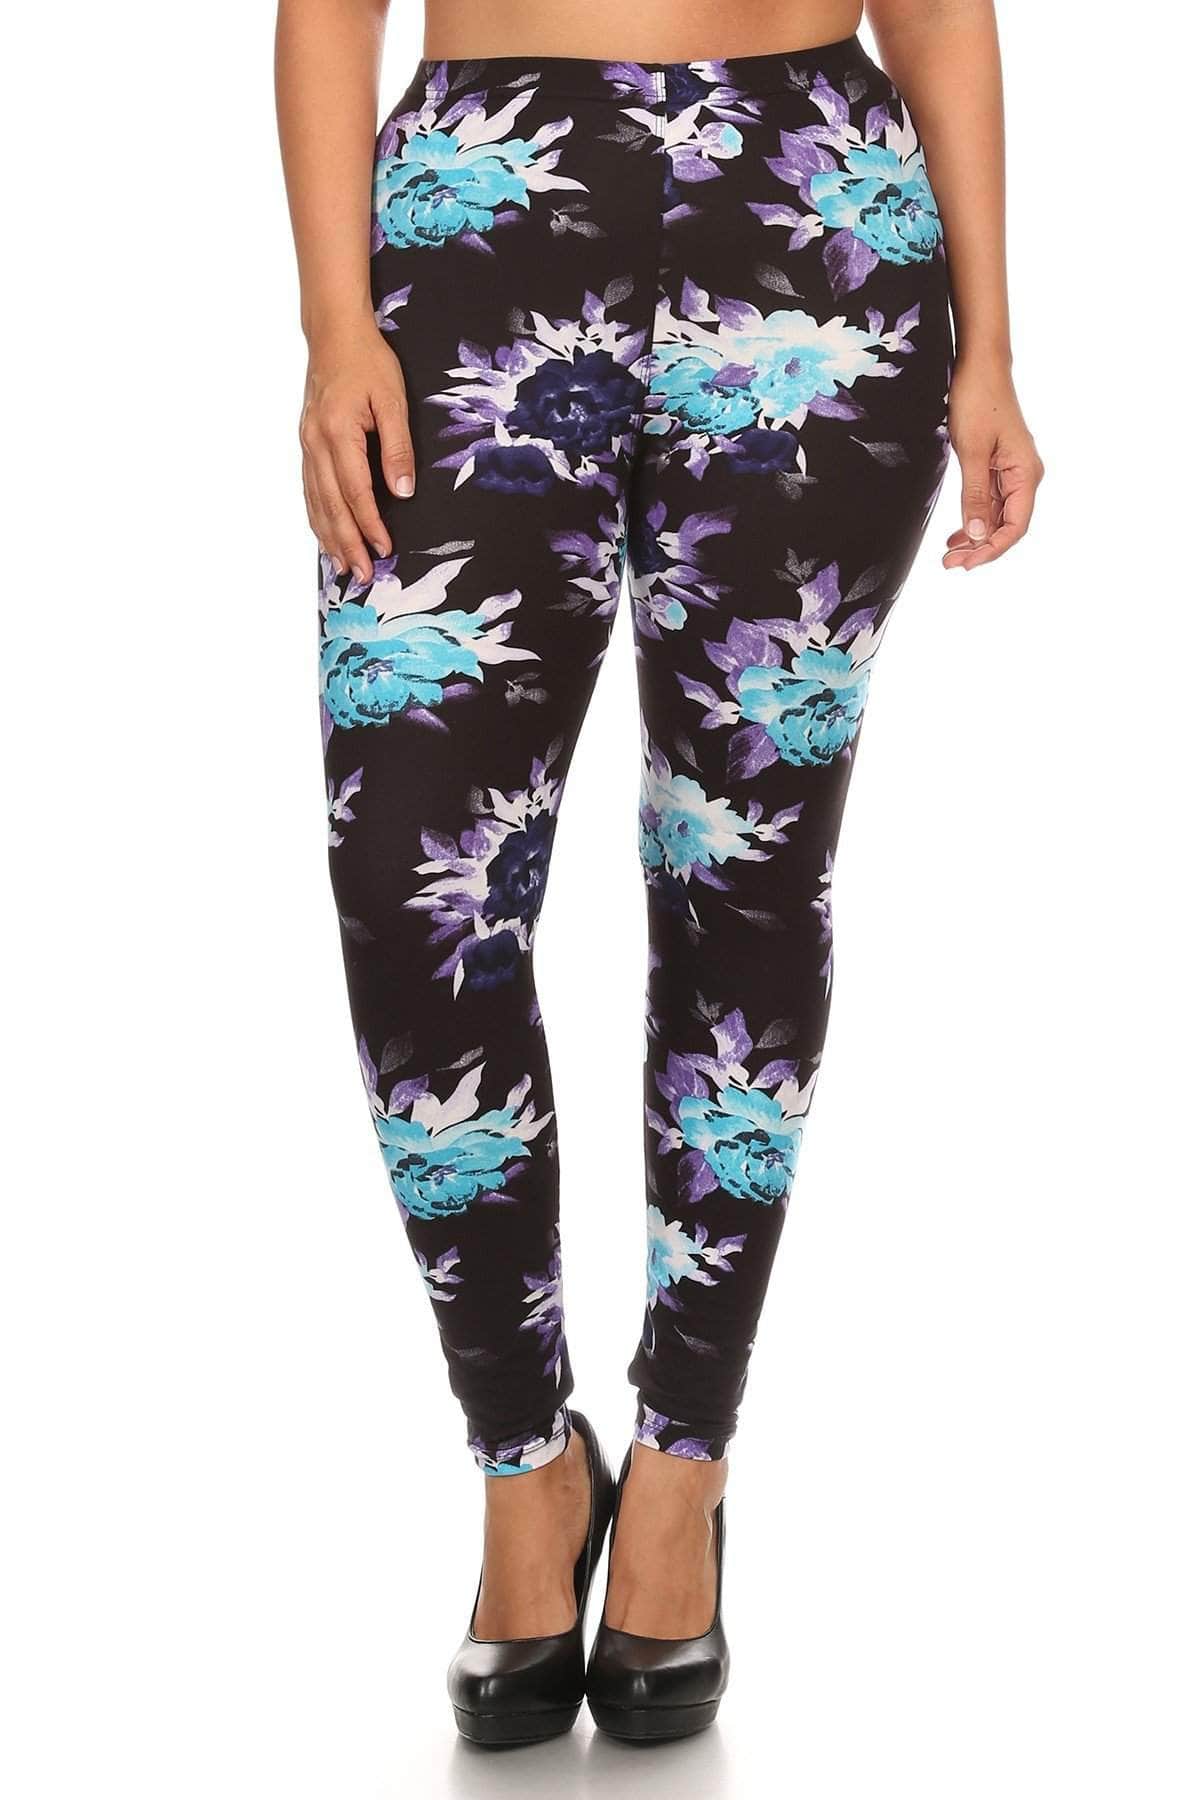 Plus Size Floral Print, Full Length Leggings In A Slim Fitting Style With A Banded High Waist-LEGGINGS-[Adult]-[Female]-Multi-Multi-Blue Zone Planet